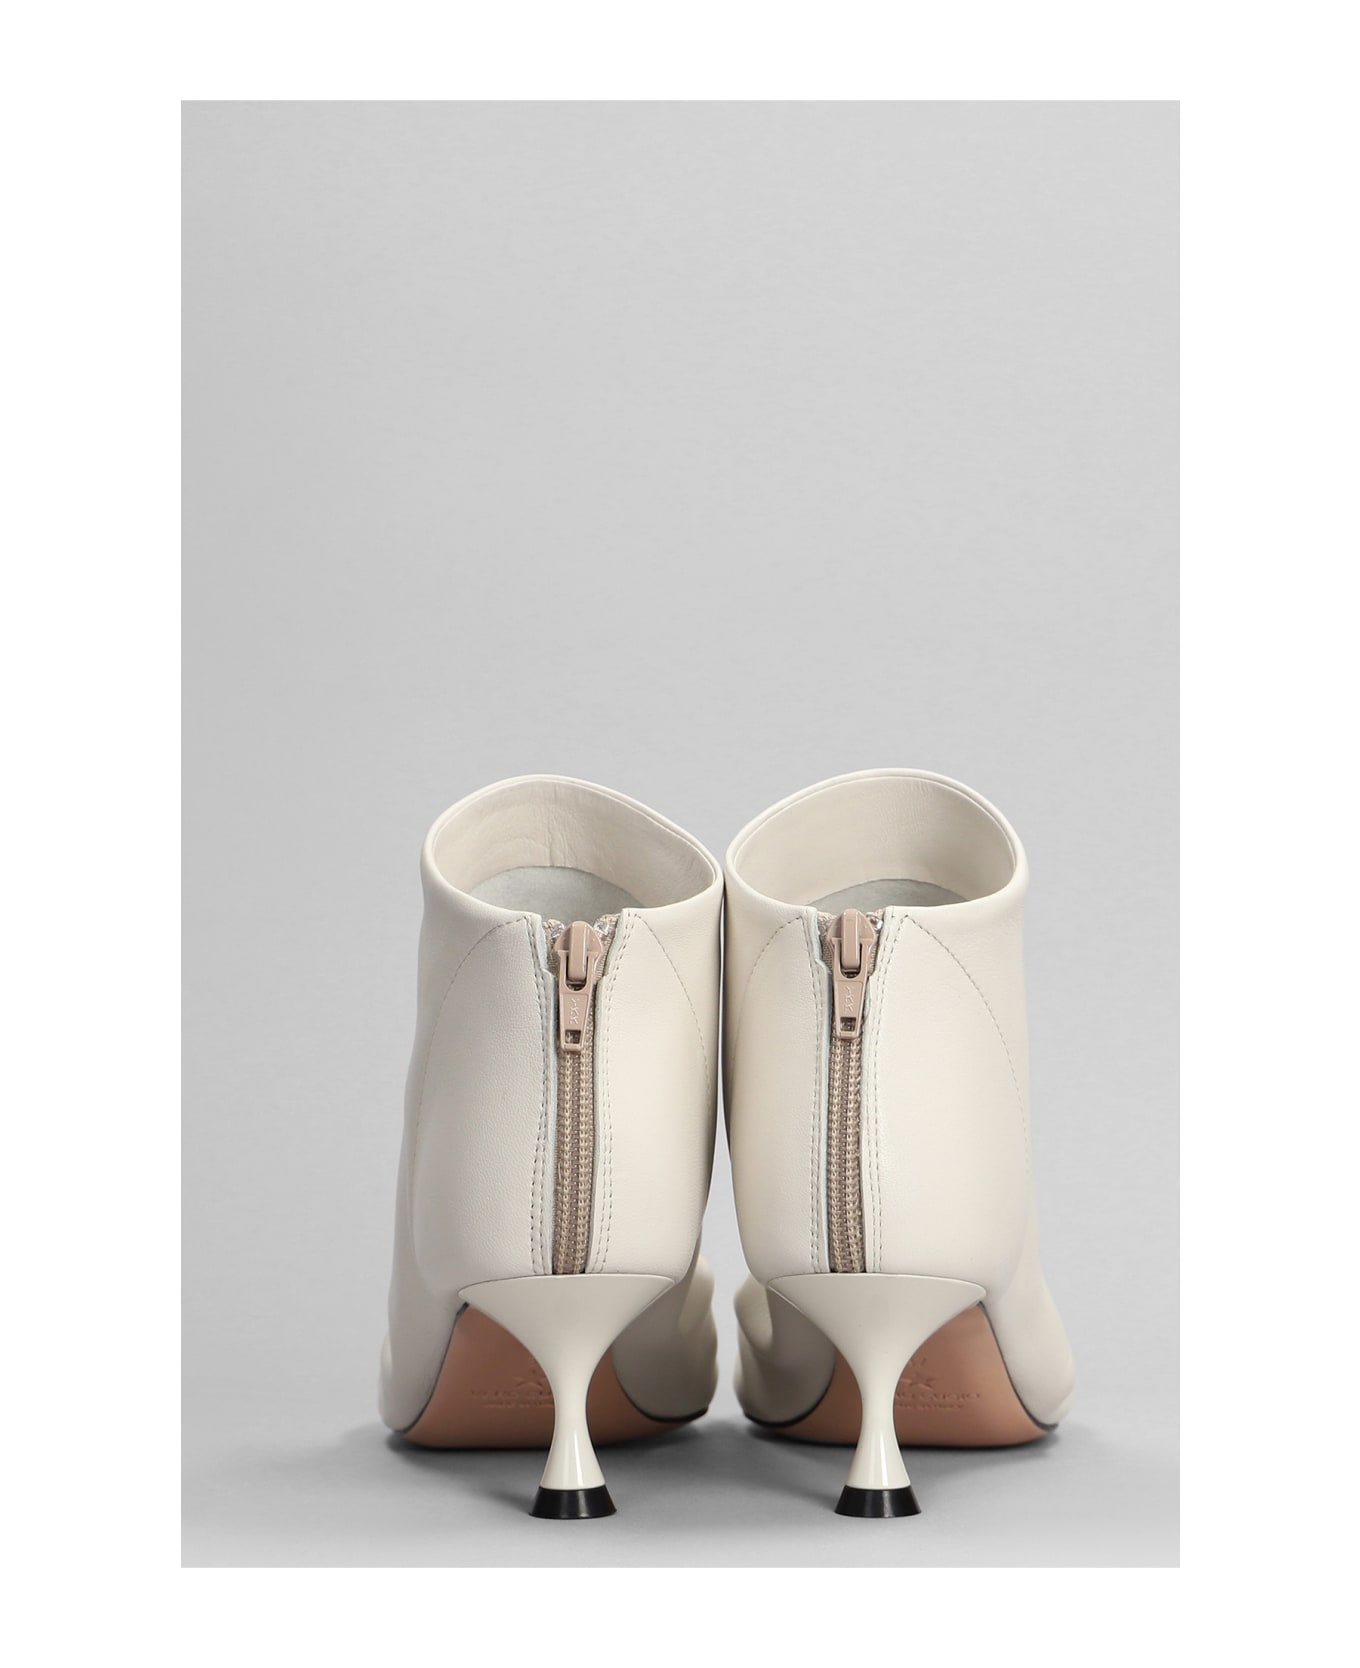 Marc Ellis High Heels Ankle Boots In Beige Leather - beige ブーツ